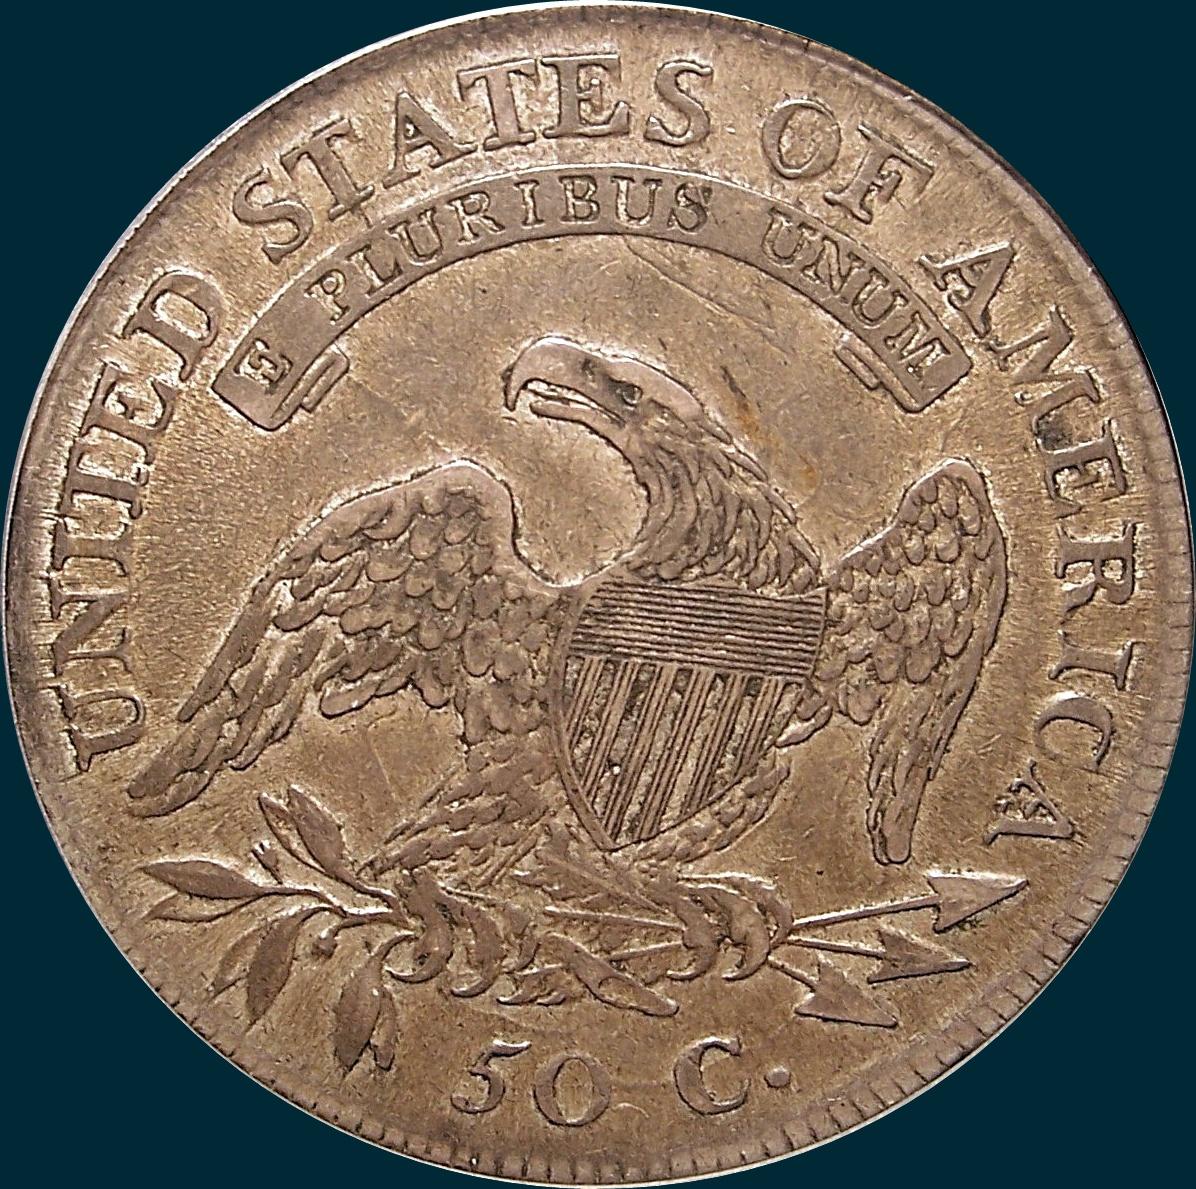 1811 O-103, Large 8, Capped bust half dollar